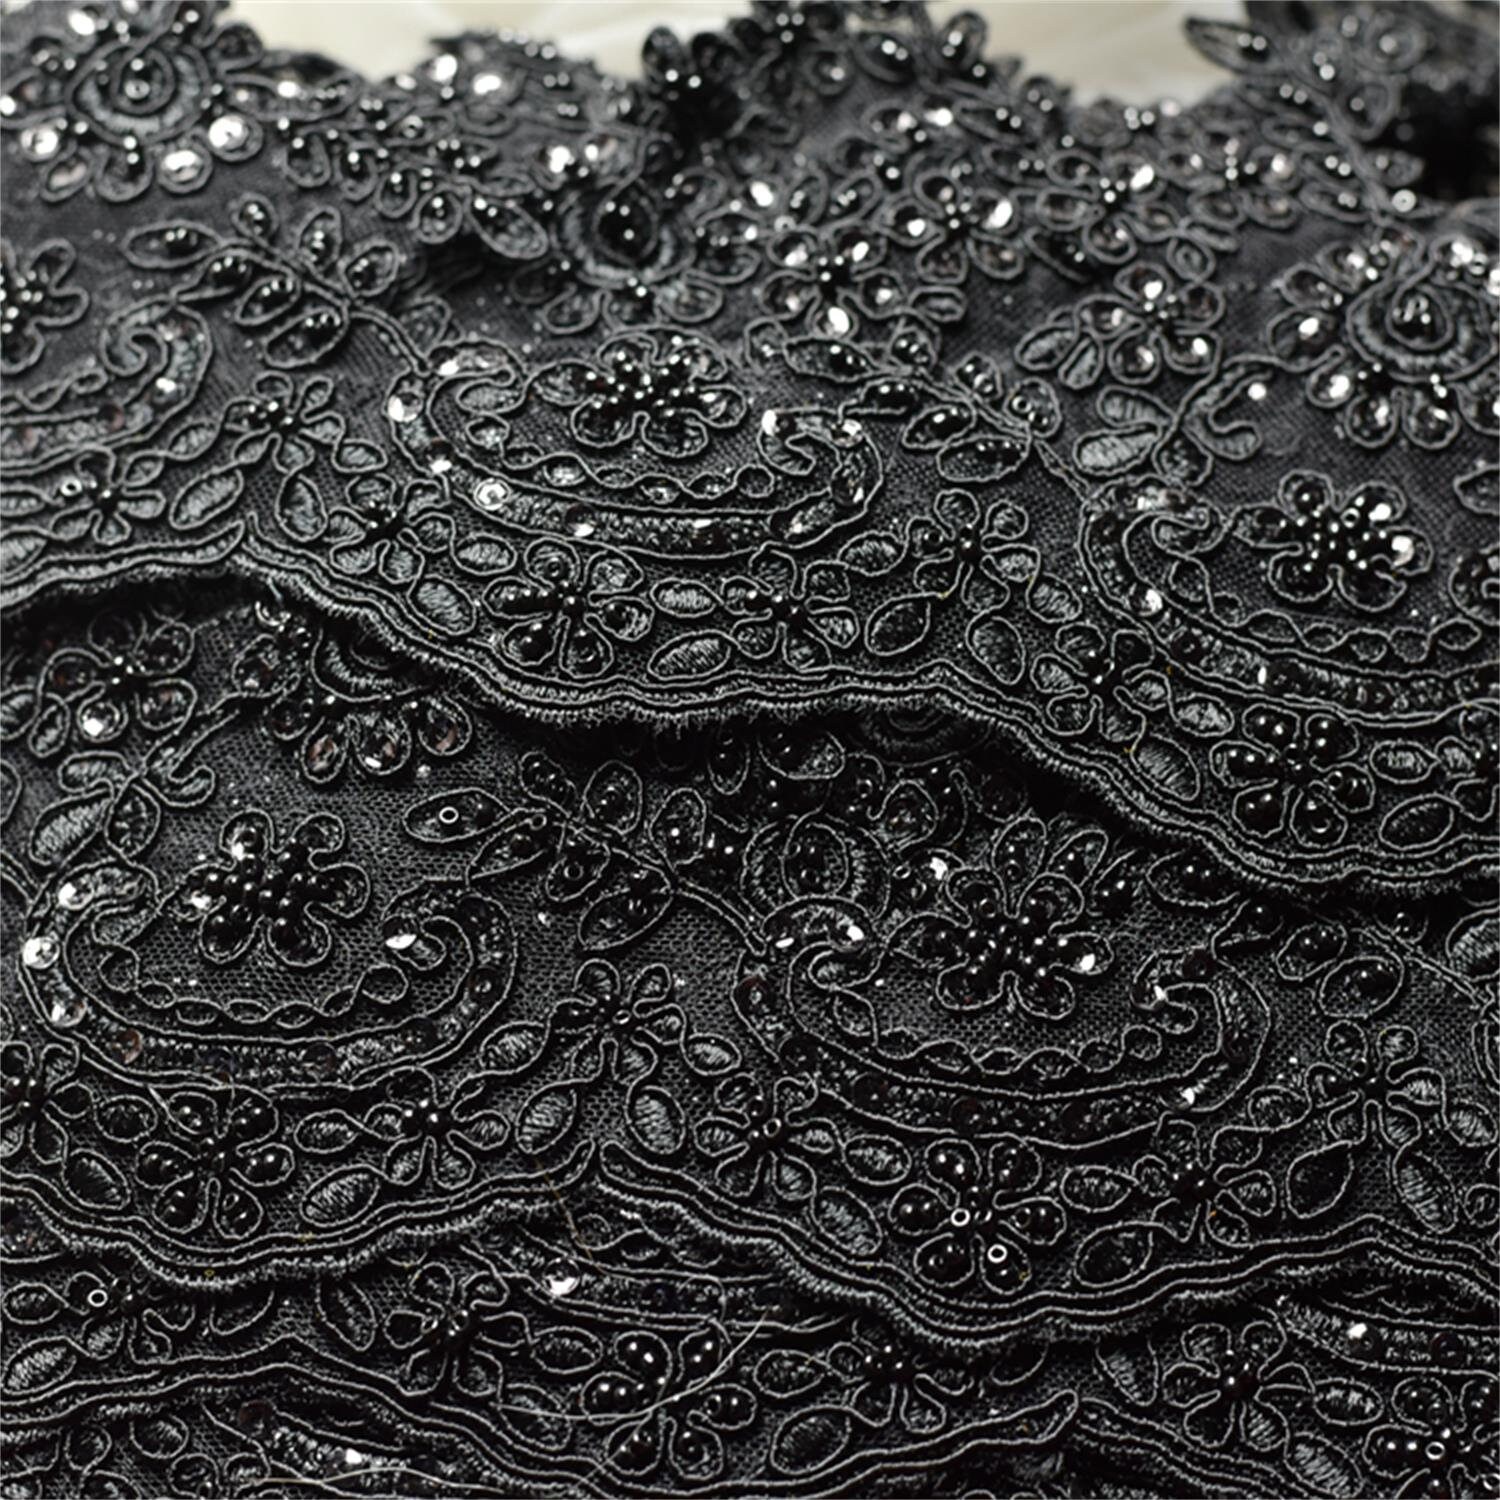 SALE Alencon Black Beaded Lace Trim With Sequined for Wedding - Etsy